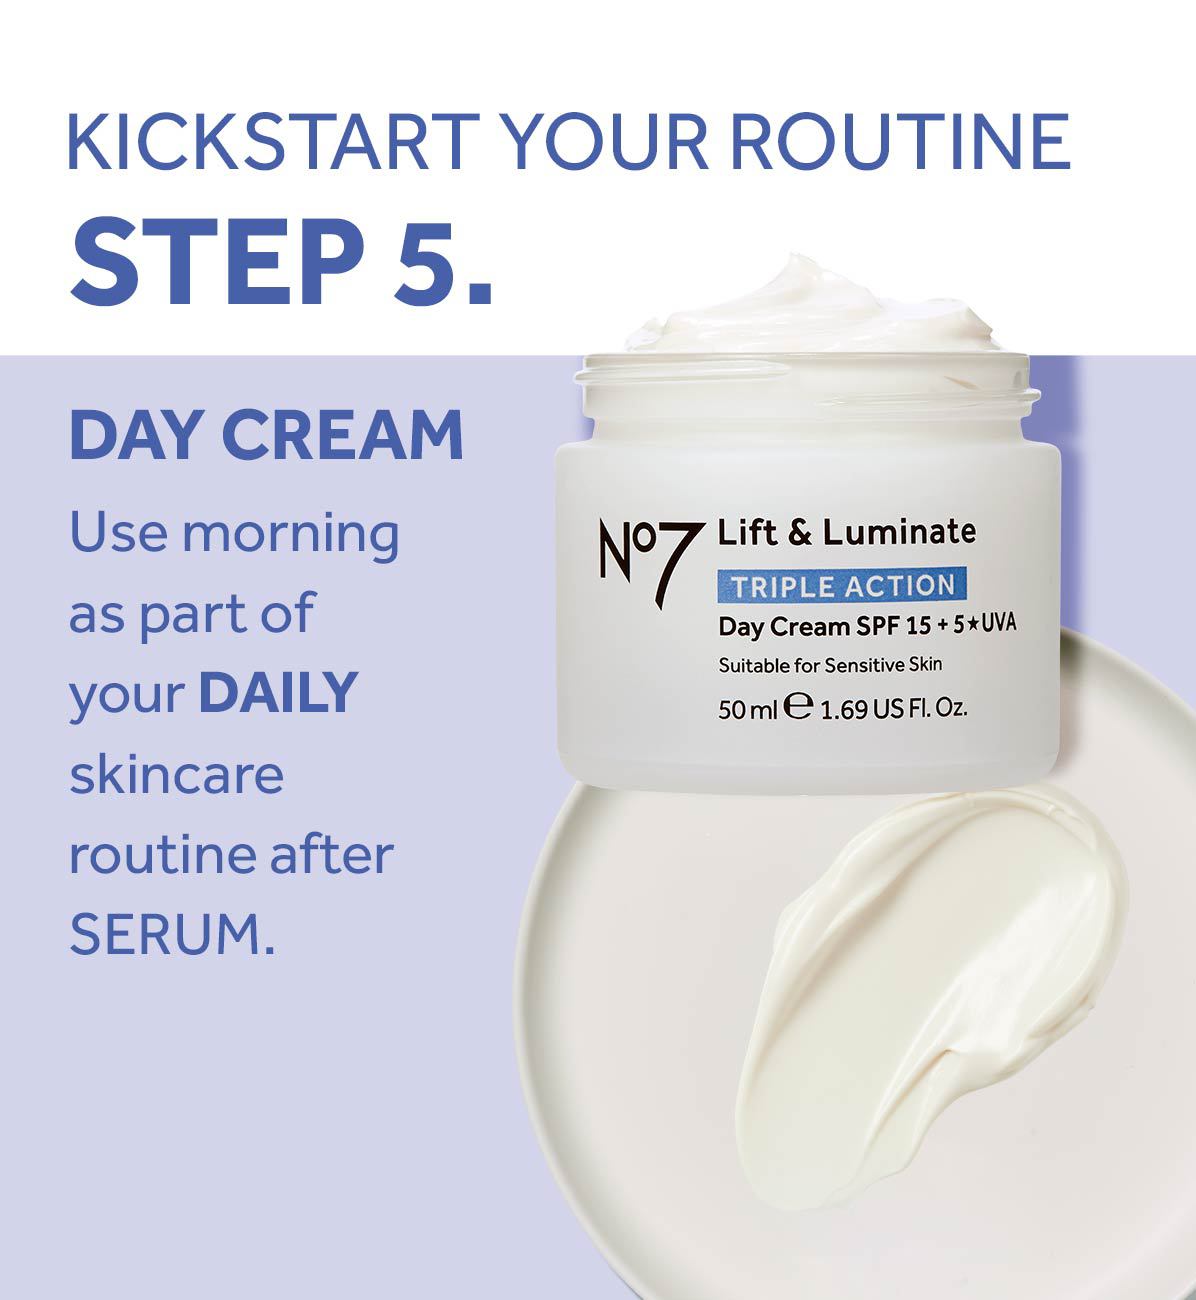 KICKSTART YOUR ROUTINE
                                  STEP 5.
                                  DAY CREAM
                                  Use morning as part of your DAILY skincare routine after
                                  SERUM.